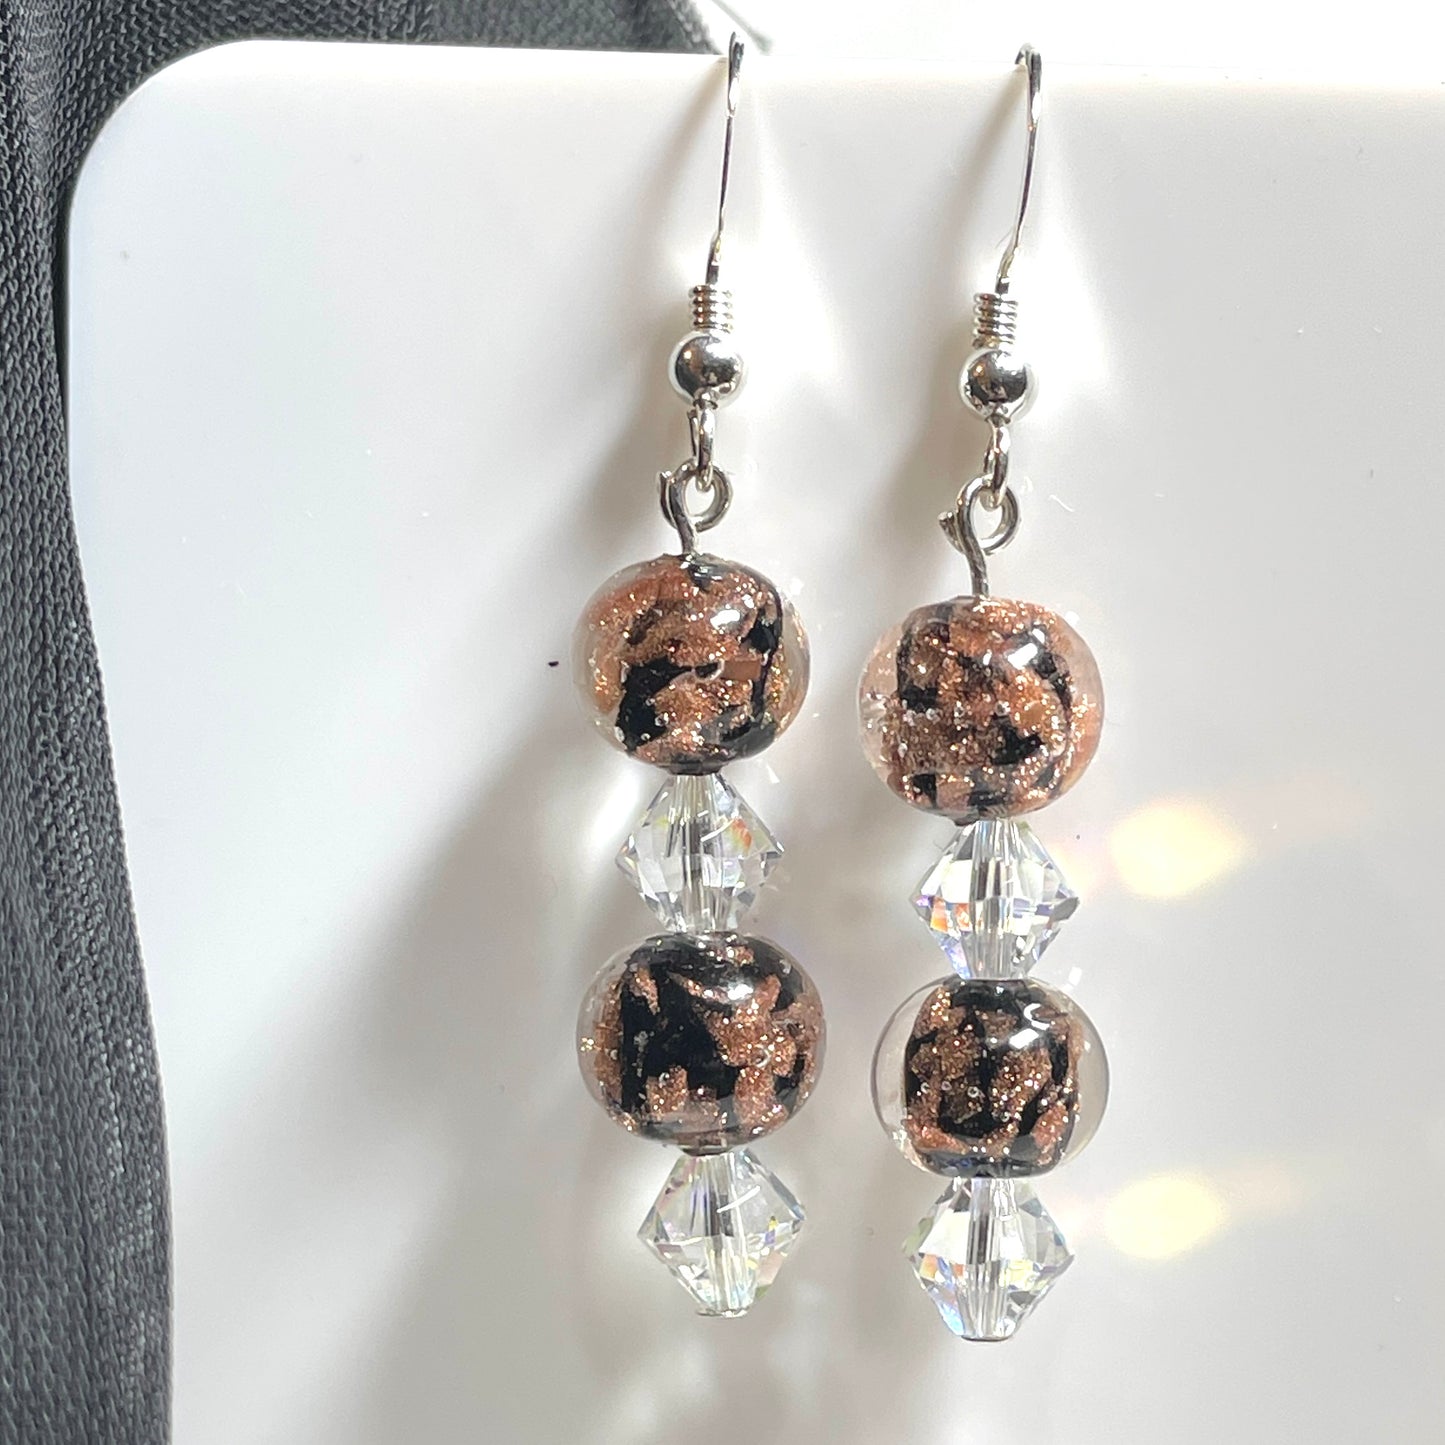 Shimmering black real Murano glass drop earrings with clear crystals